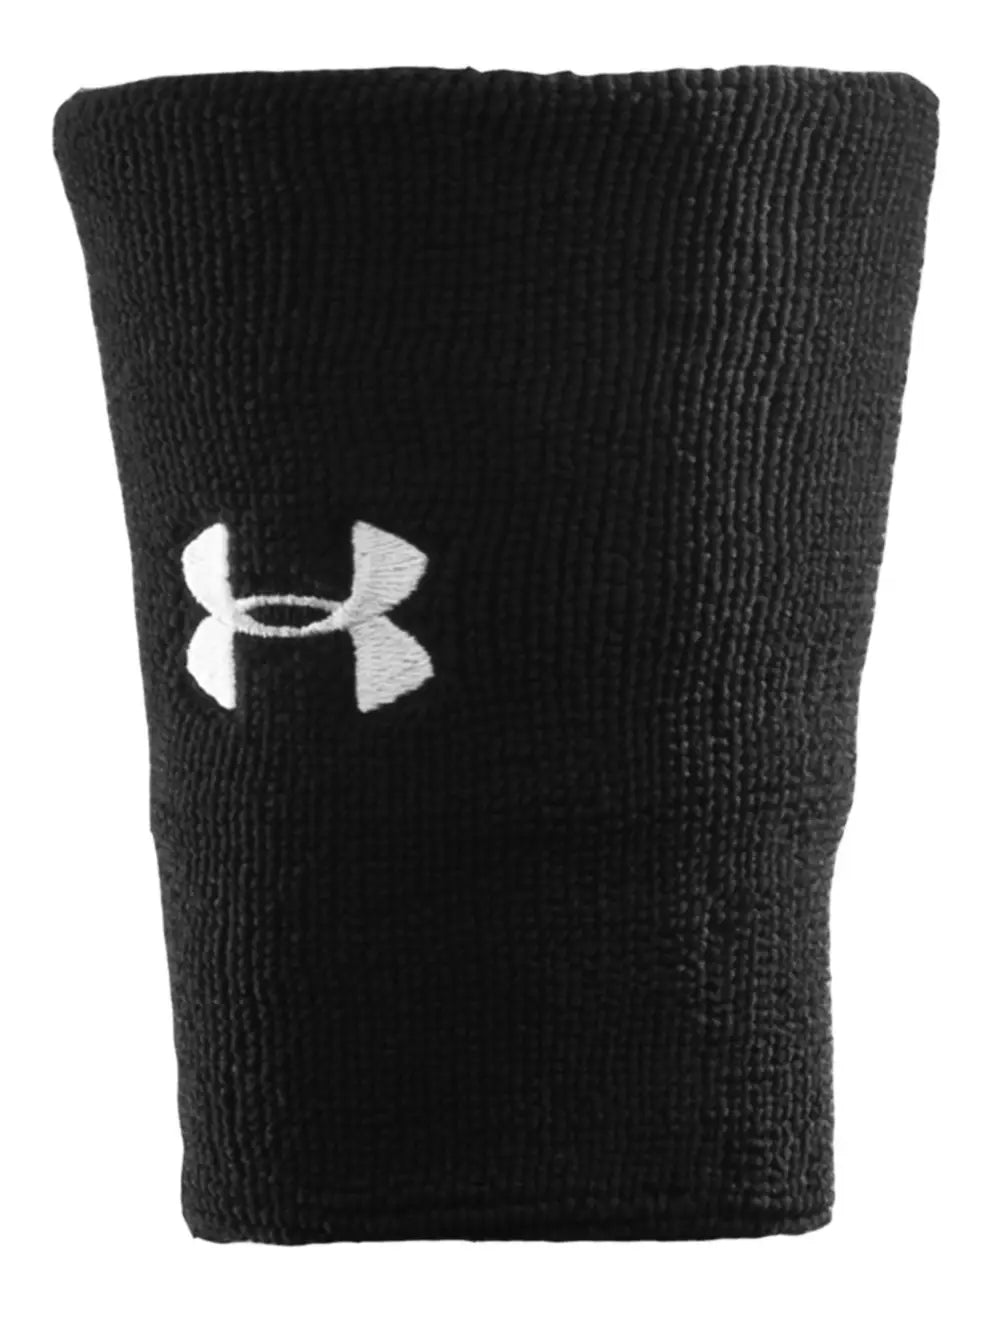 Under Armour Performance Wristbands - 6"